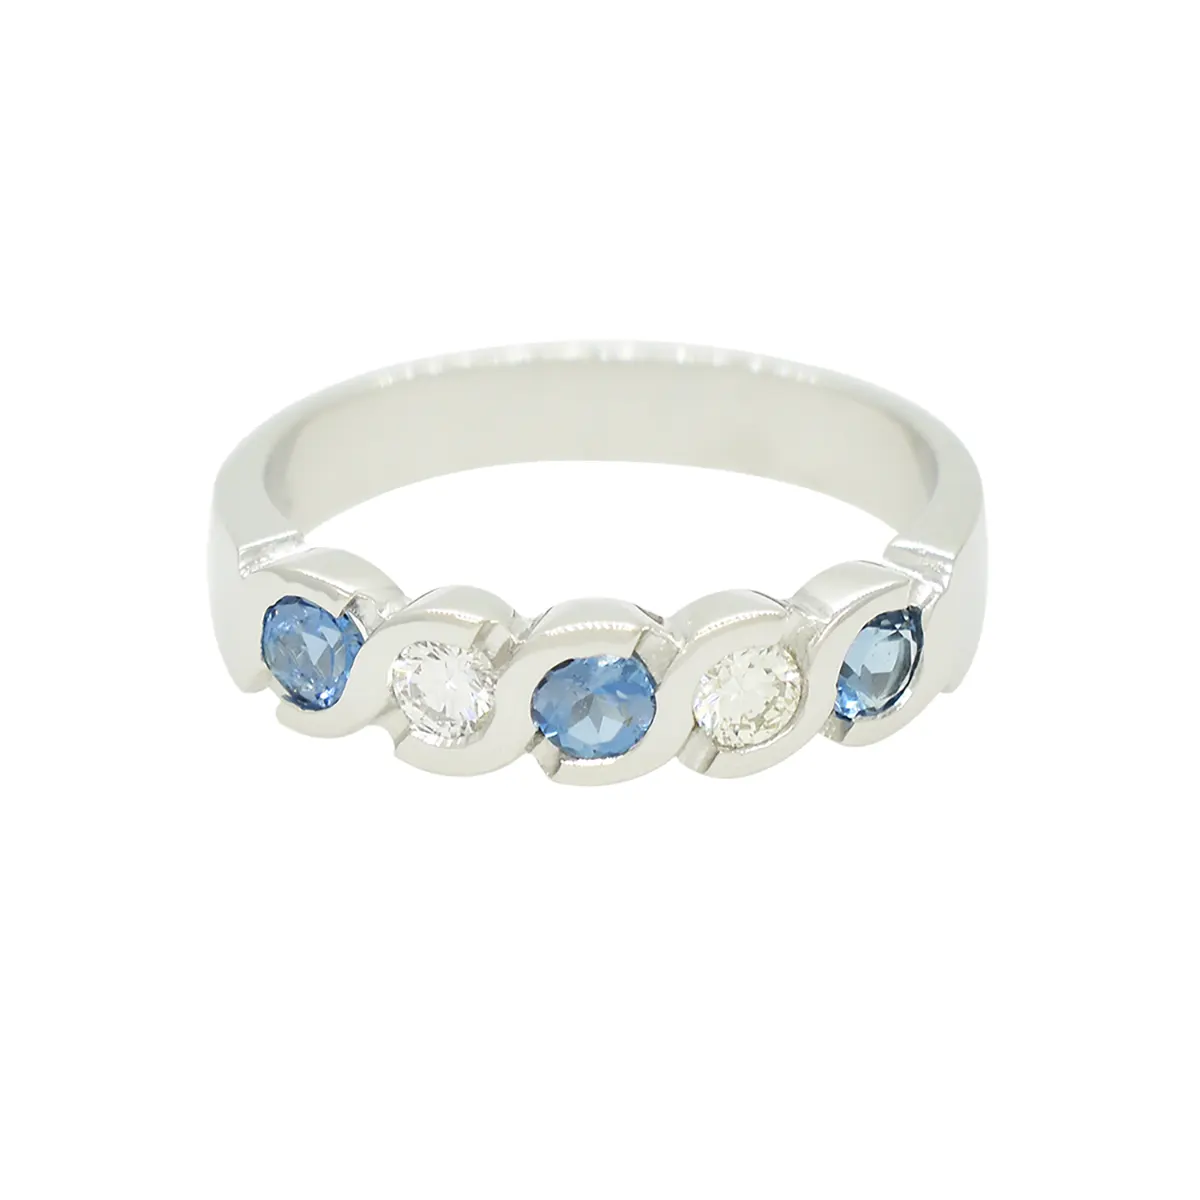 Aquamarine and diamond wedding band ring with 3 round cut natural aquamarines in 0.28 Ct. total weight and 2 round cut diamonds in 0.18 Ct. total weight